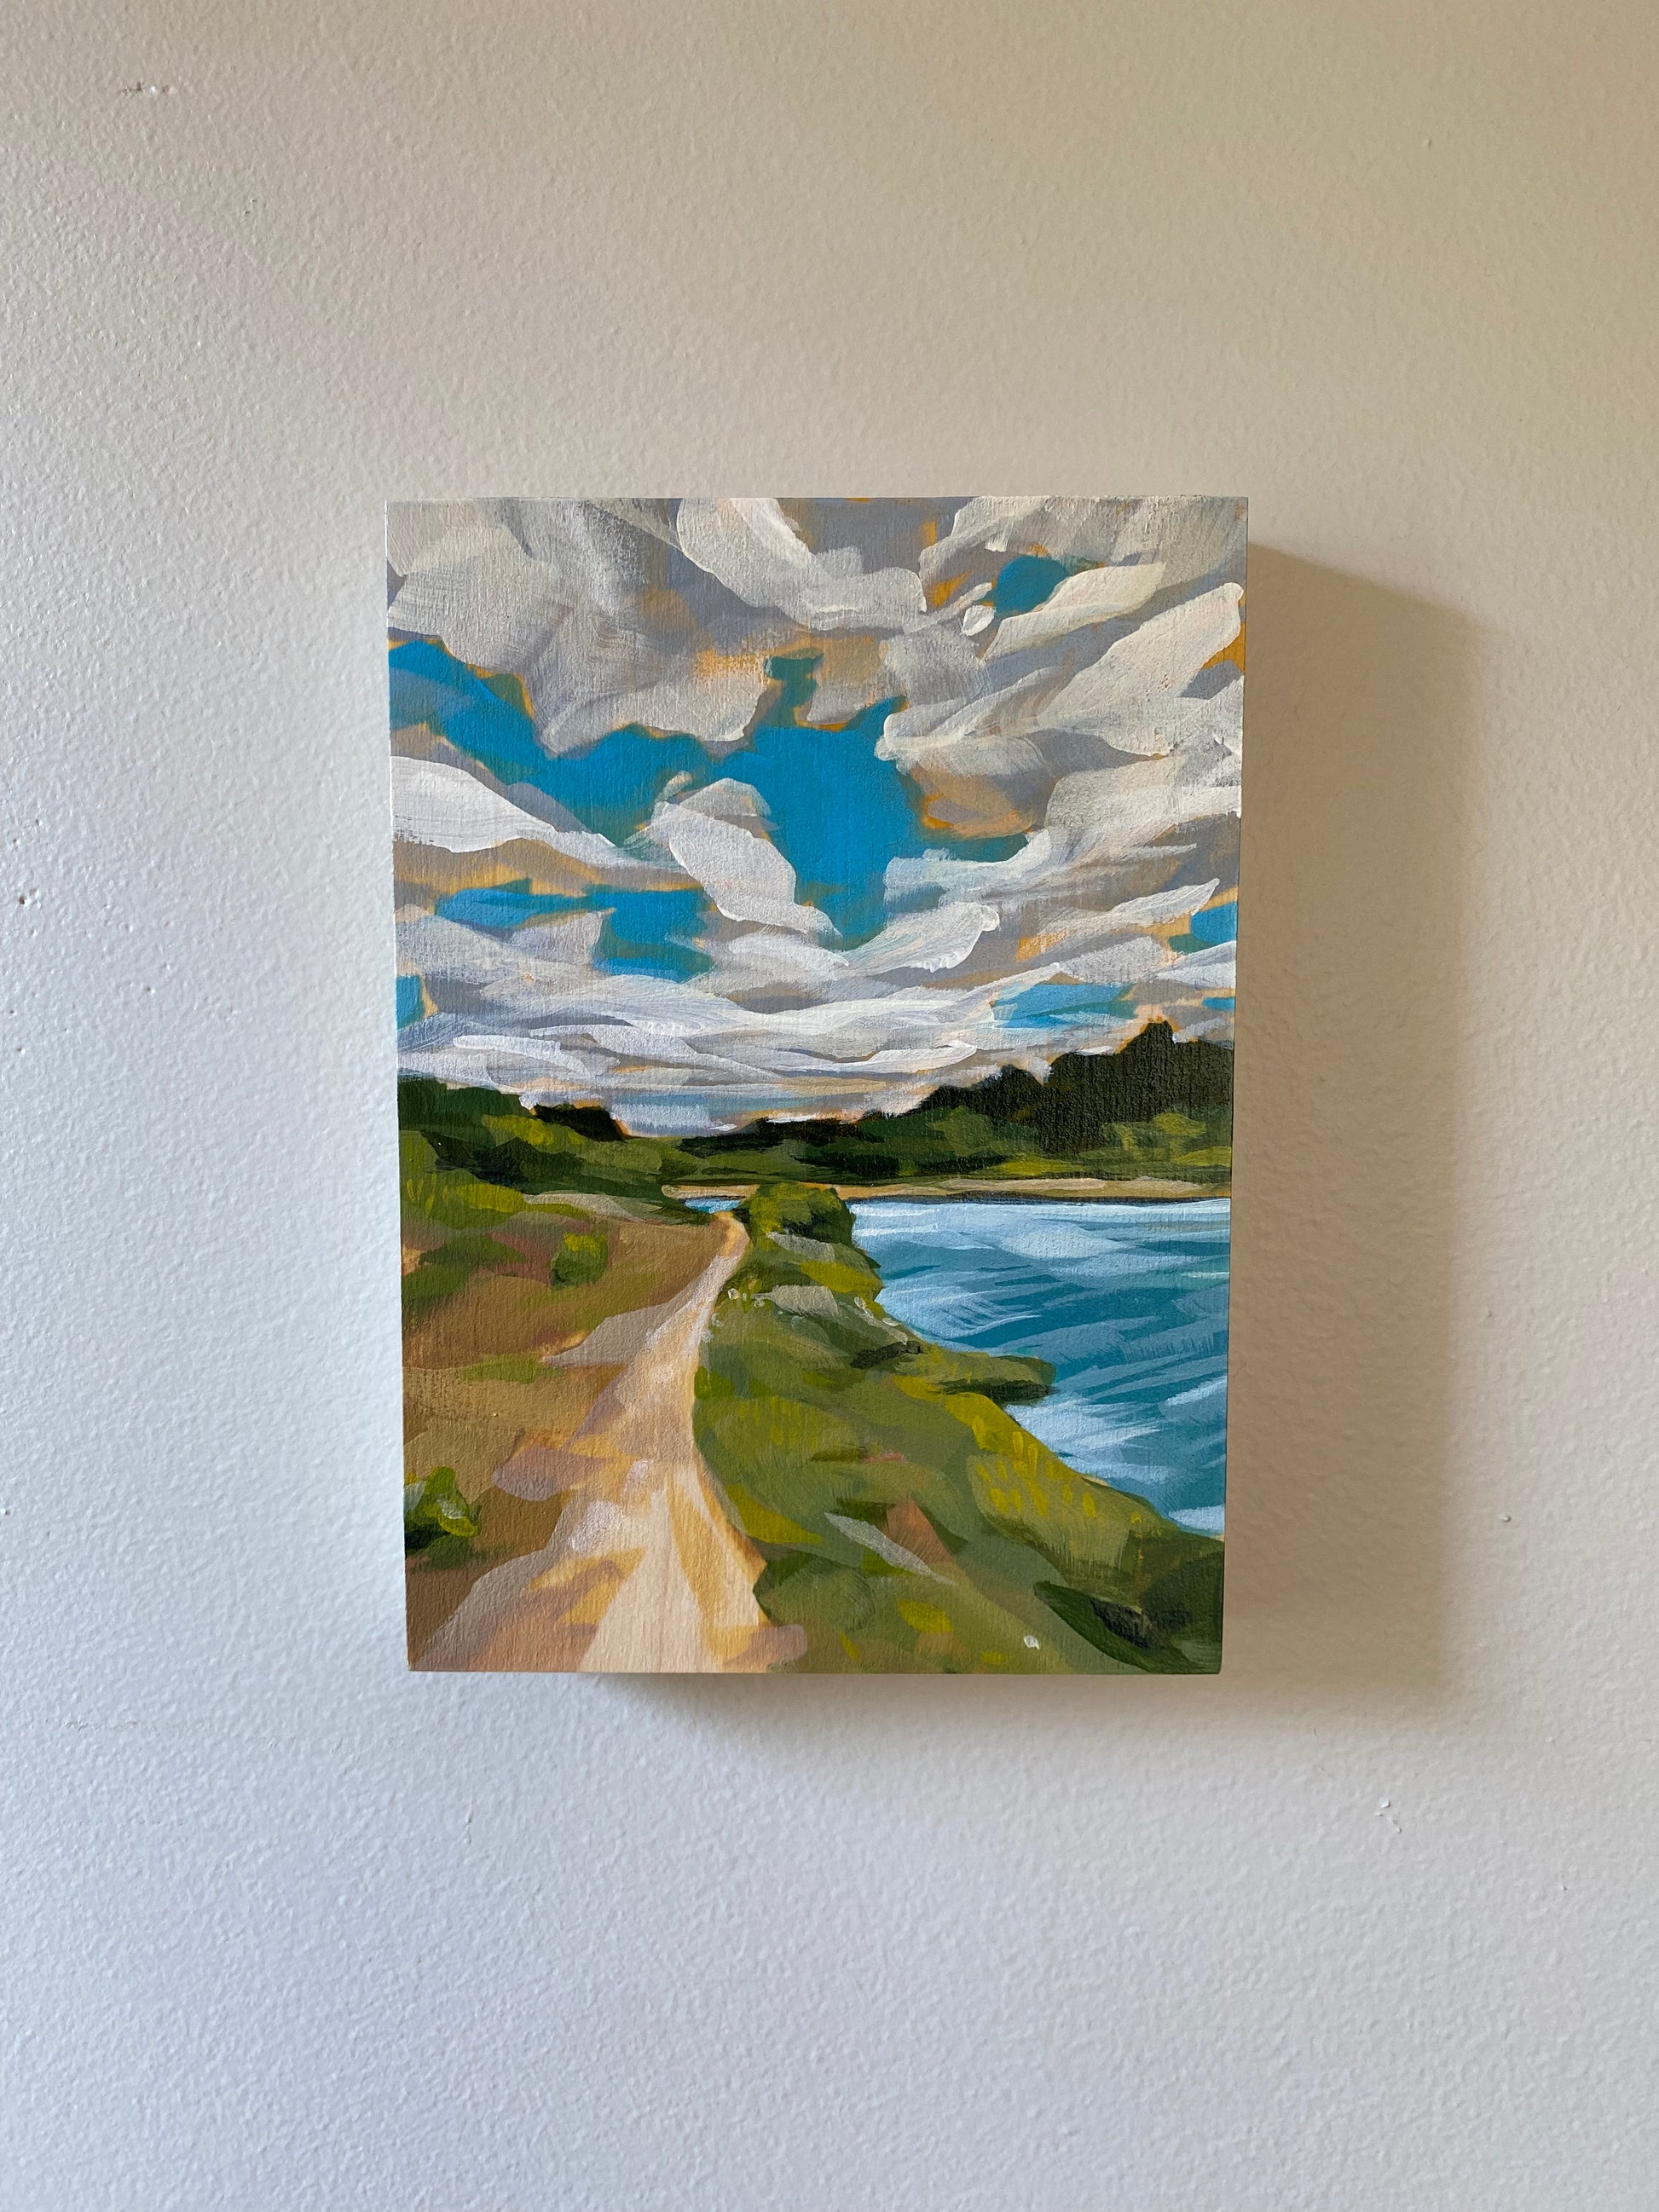 5x7 acrylic painting for sale of a trail . Features bright blues with a cloudy sky and lush green trees.